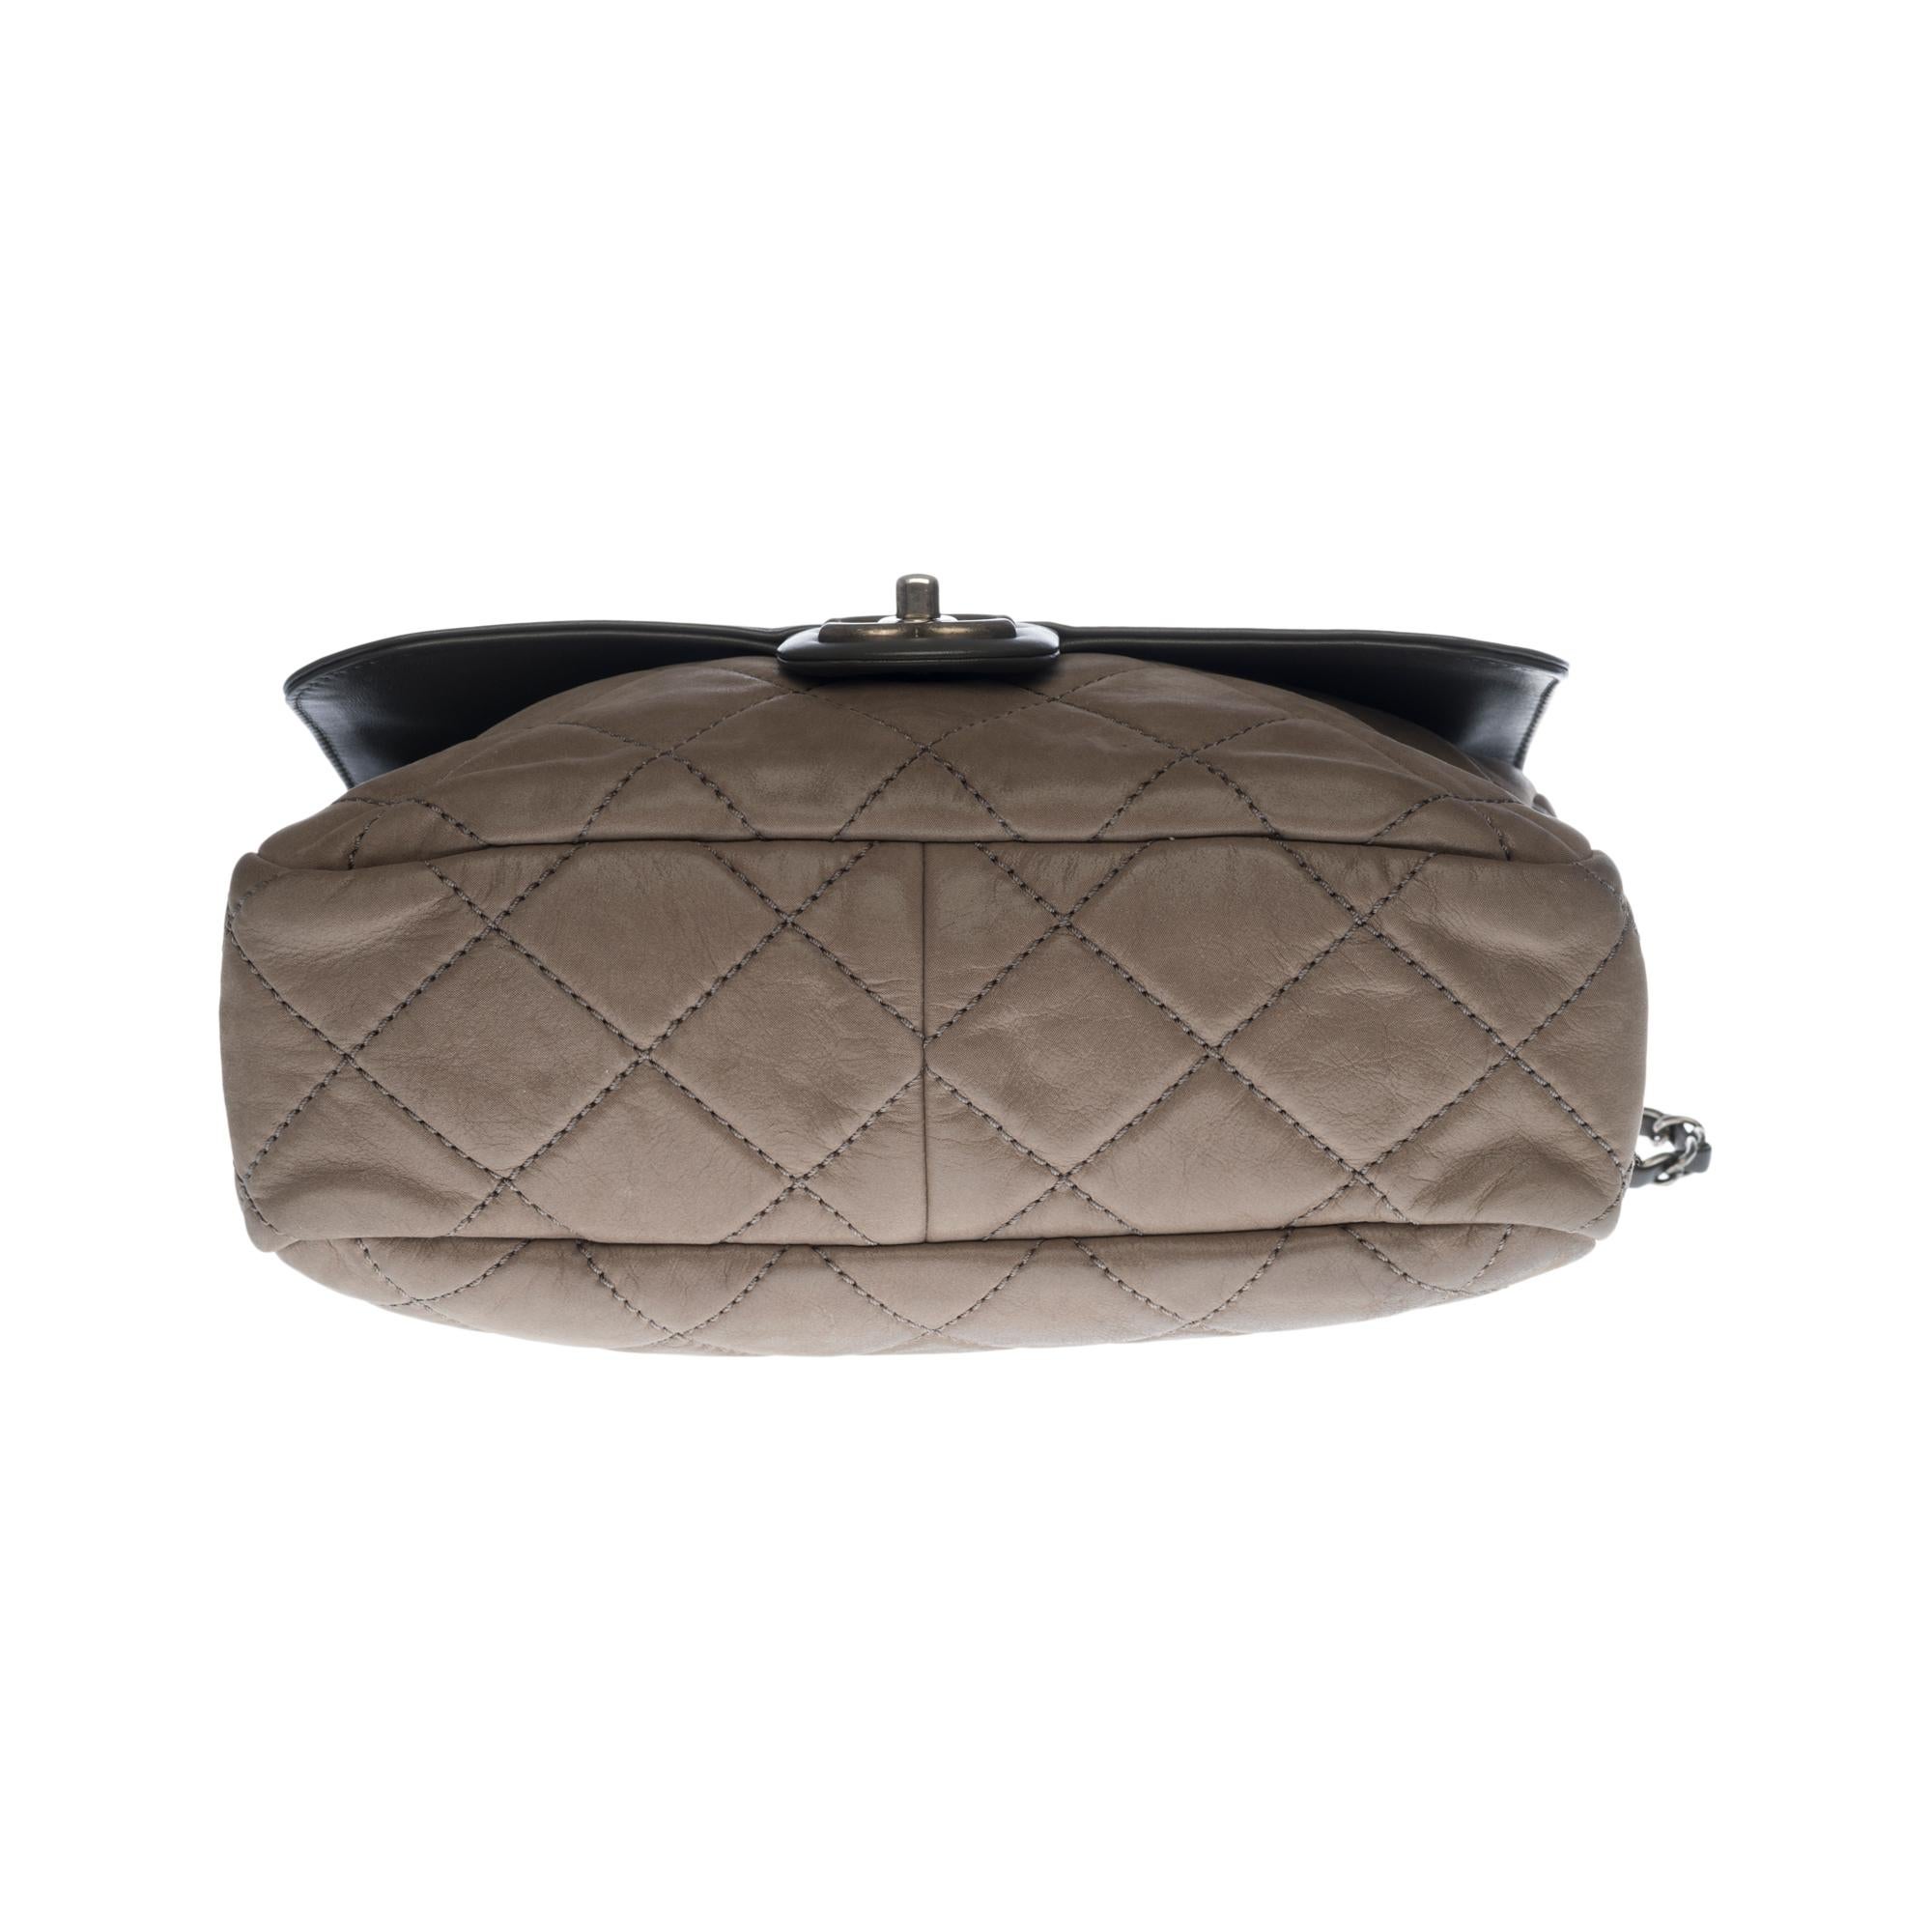 Chanel Classic Flap shoulder bag in grey semi-quilted leather, SHW 3